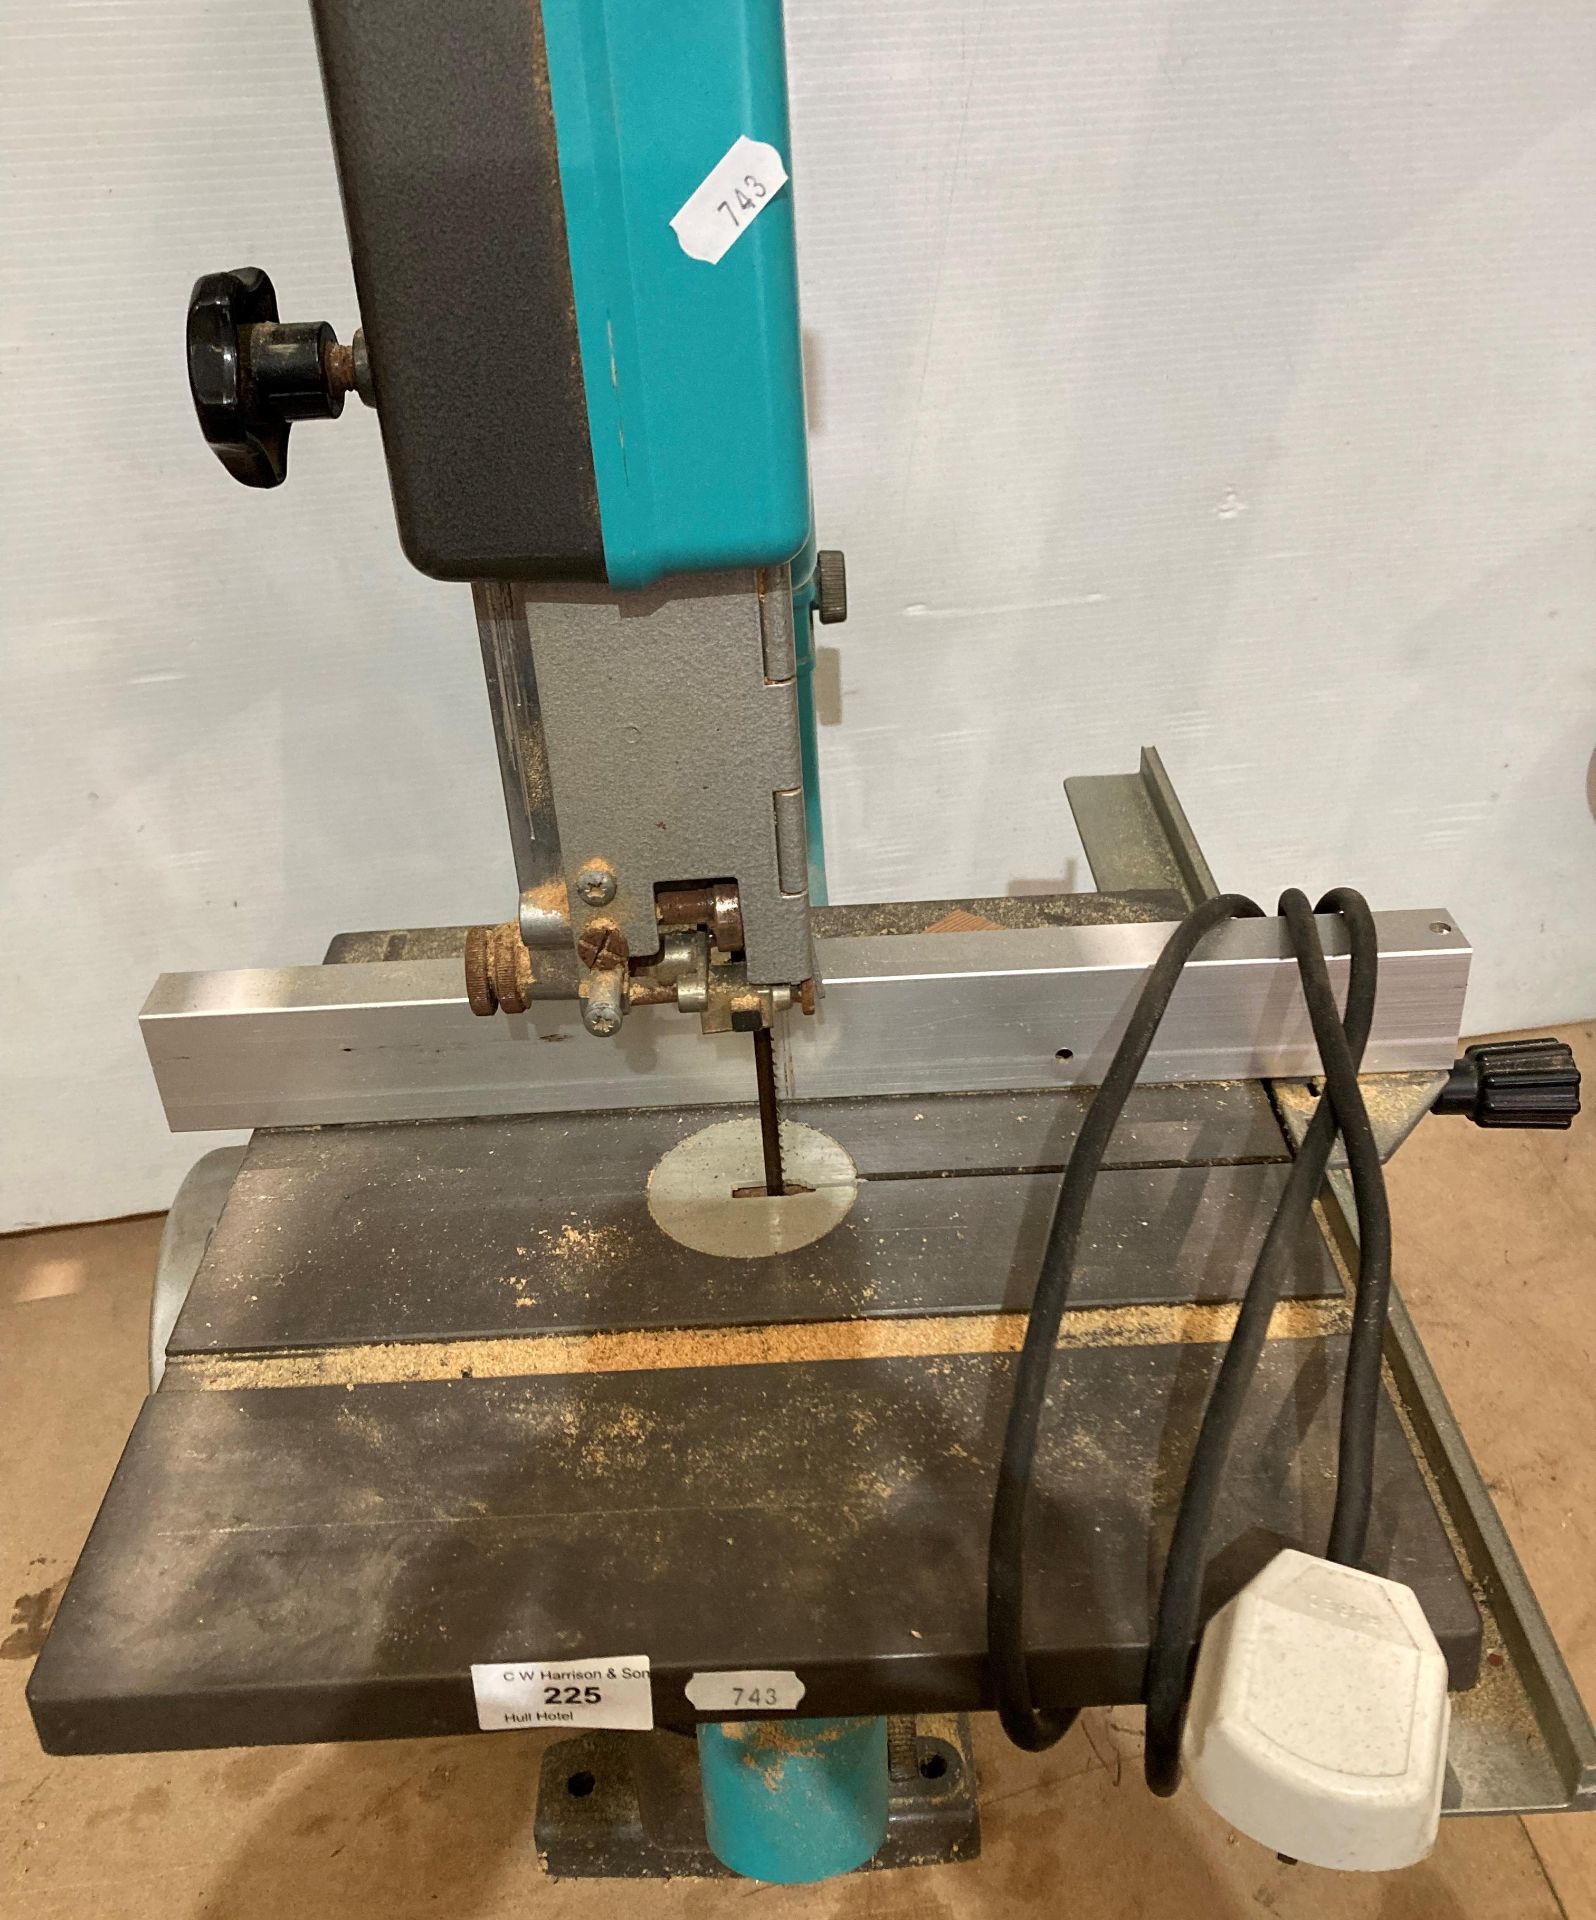 Inca Euro 260 table-top band saw (240v) approximately 90cm high (saleroom location: MA3) - Image 3 of 3